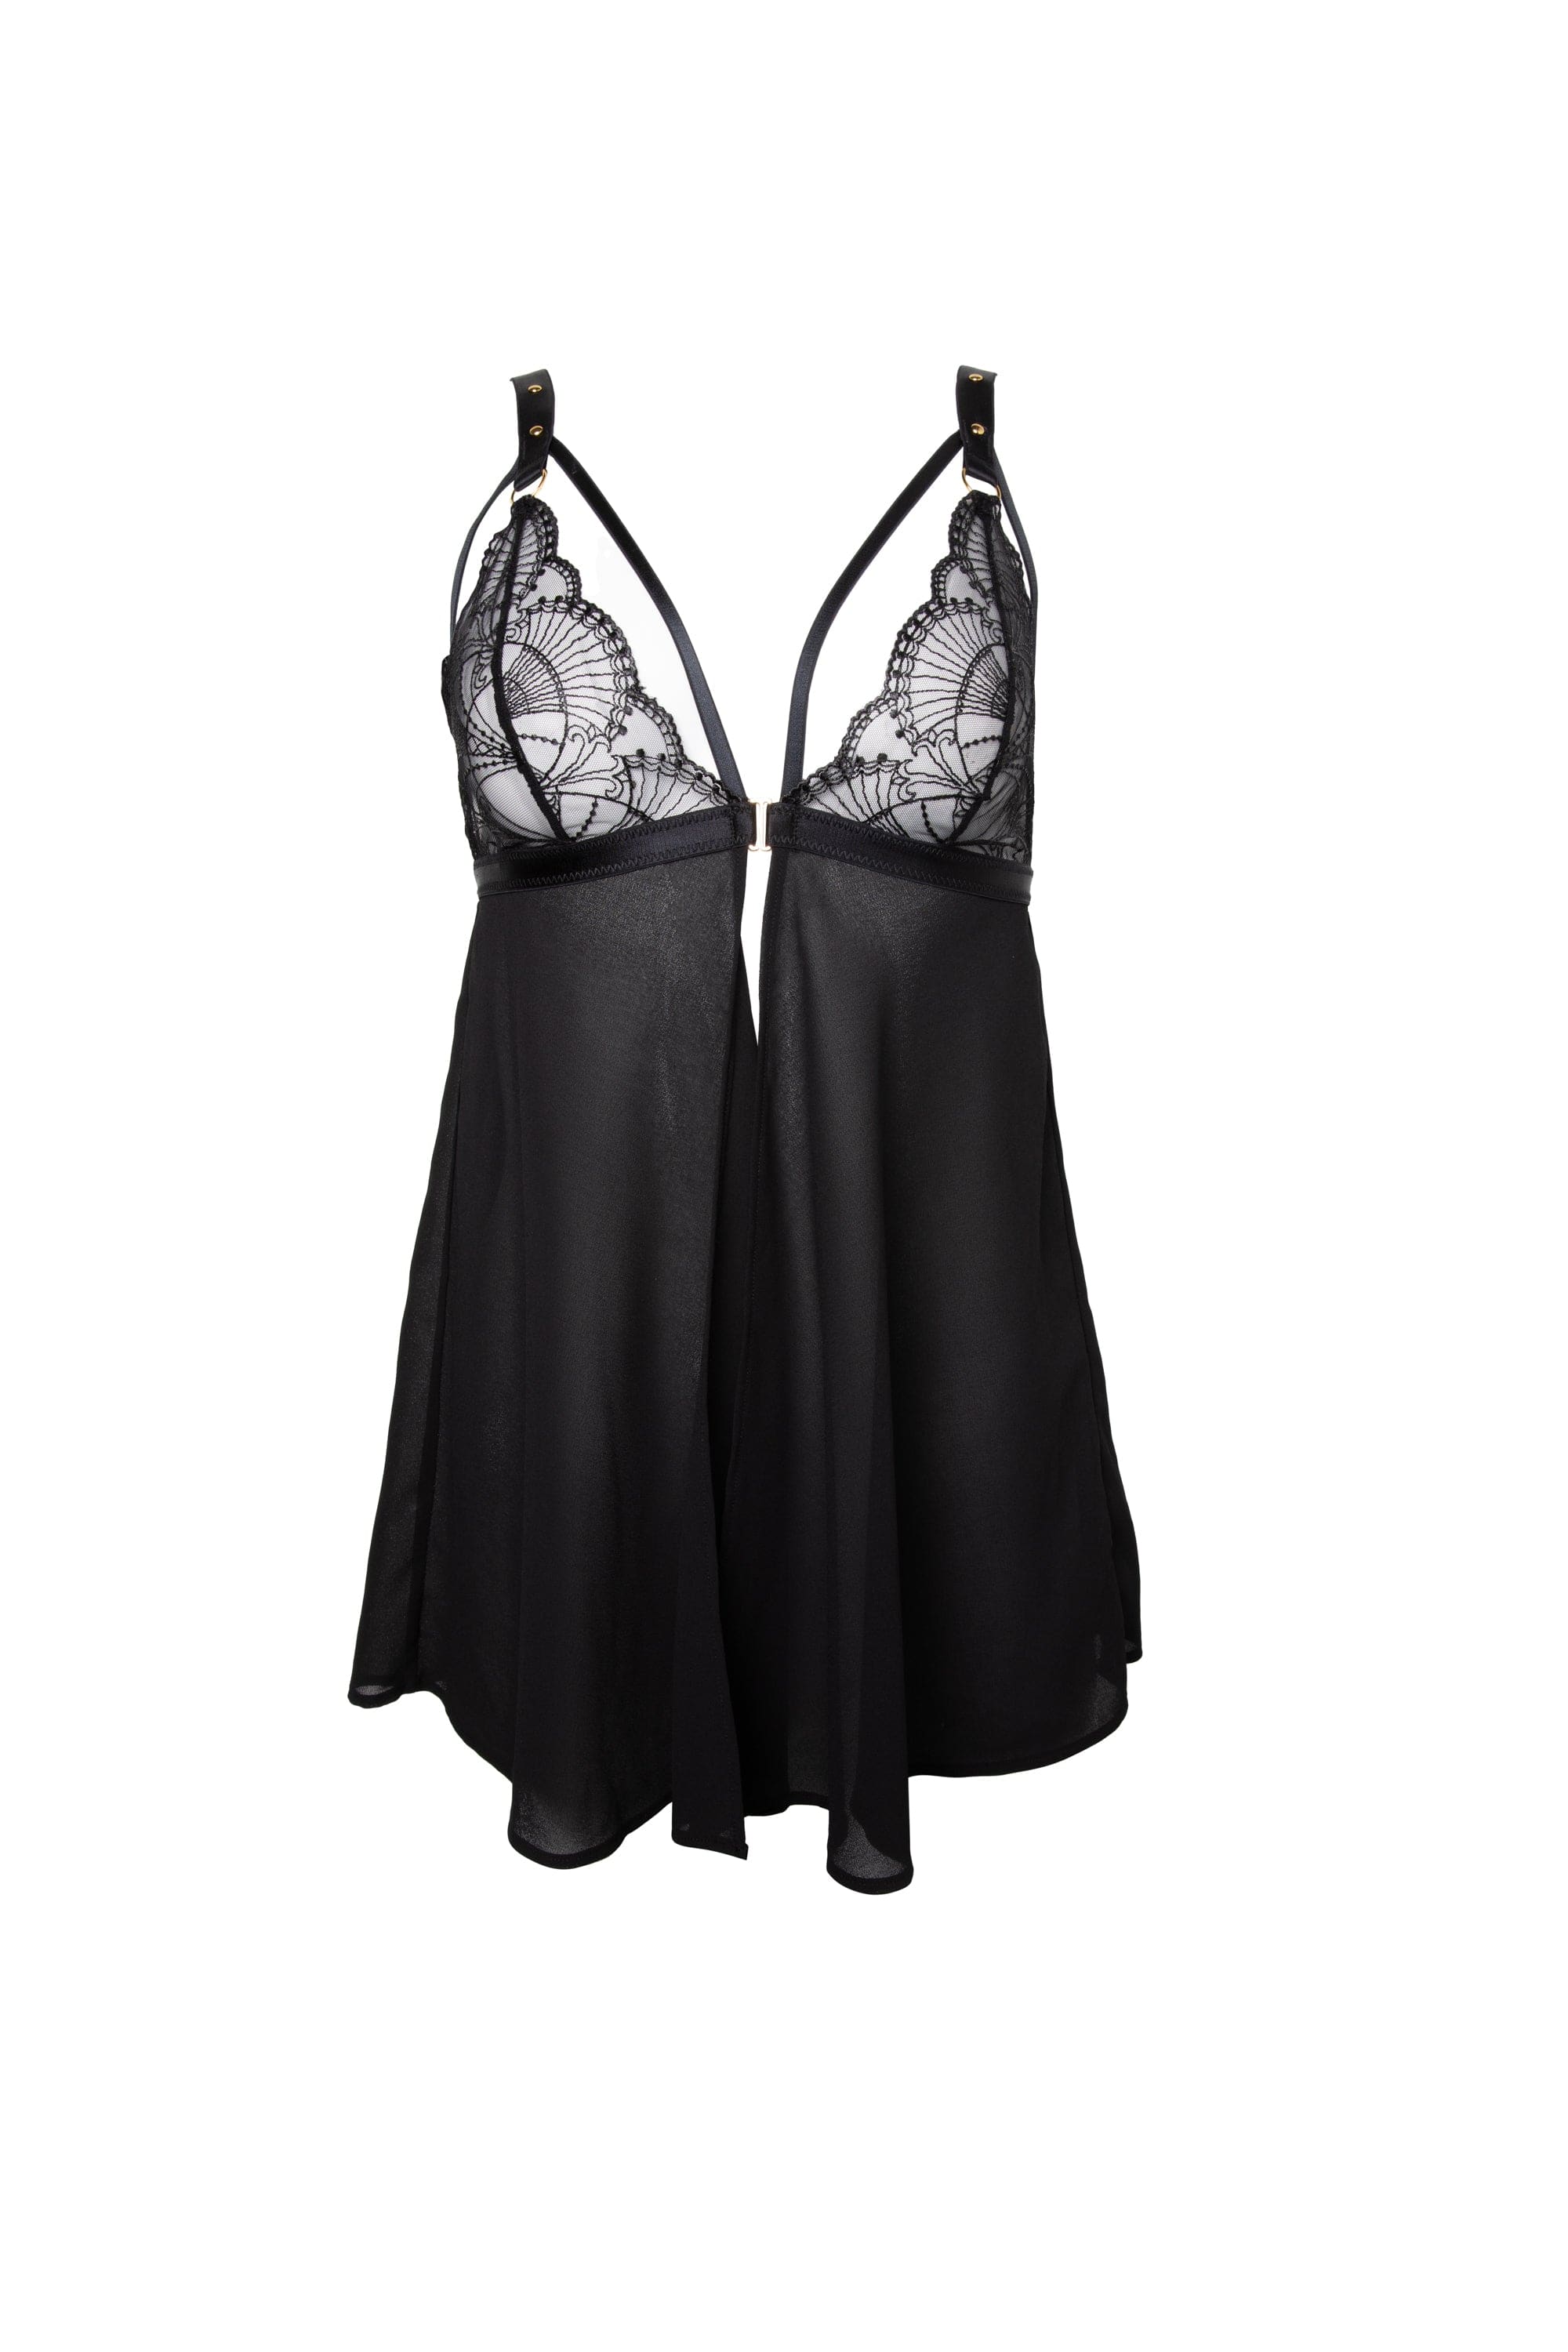 Pippa Black Deco Embroidered Caged Babydoll